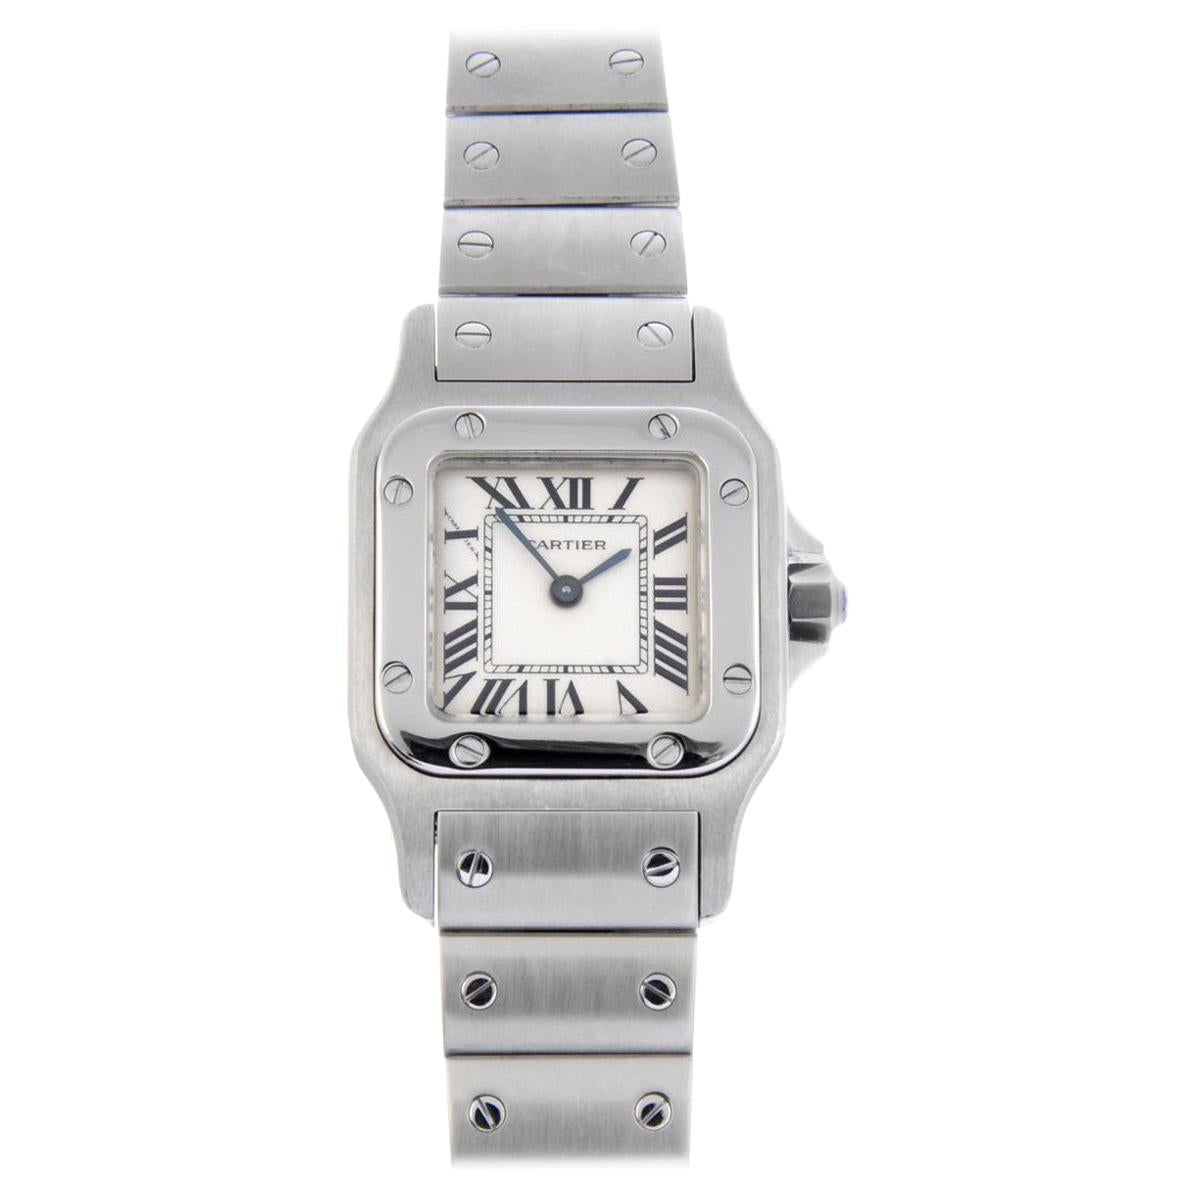 Cartier Santos Bracelet Watch, Stainless Steel Case, Reference 1565